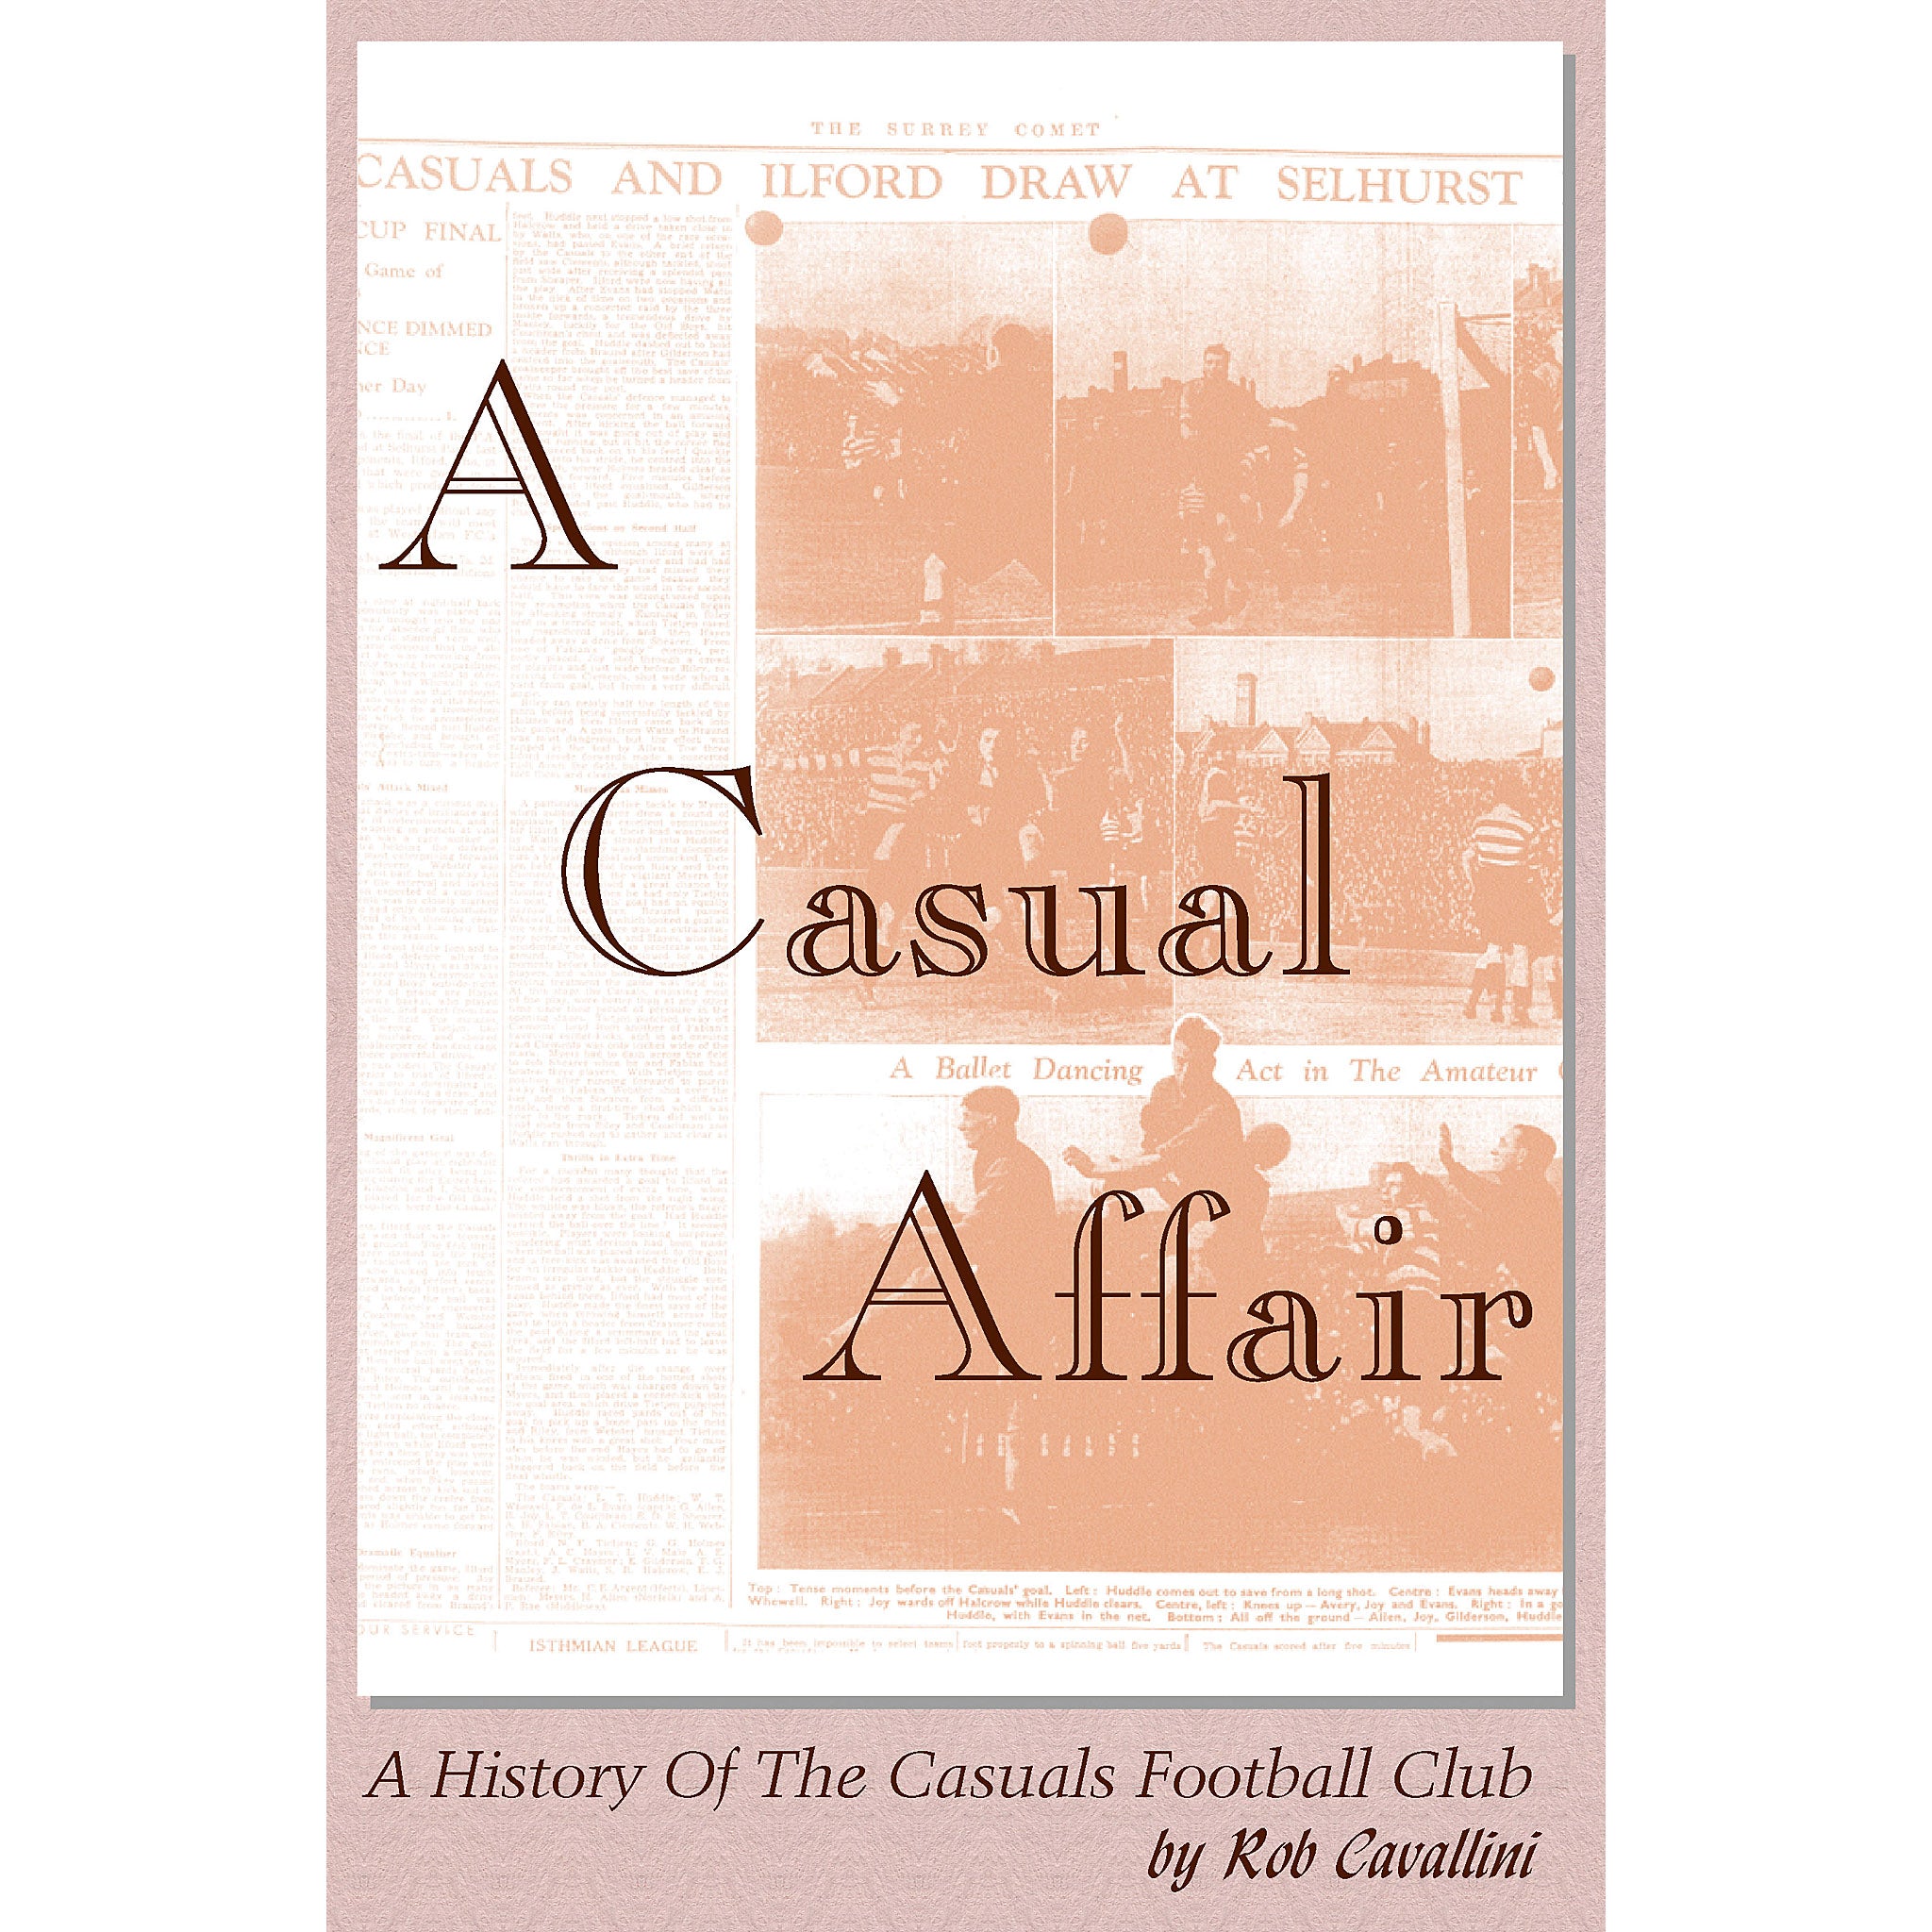 A Casual Affair – A History Of The Casuals Football Club